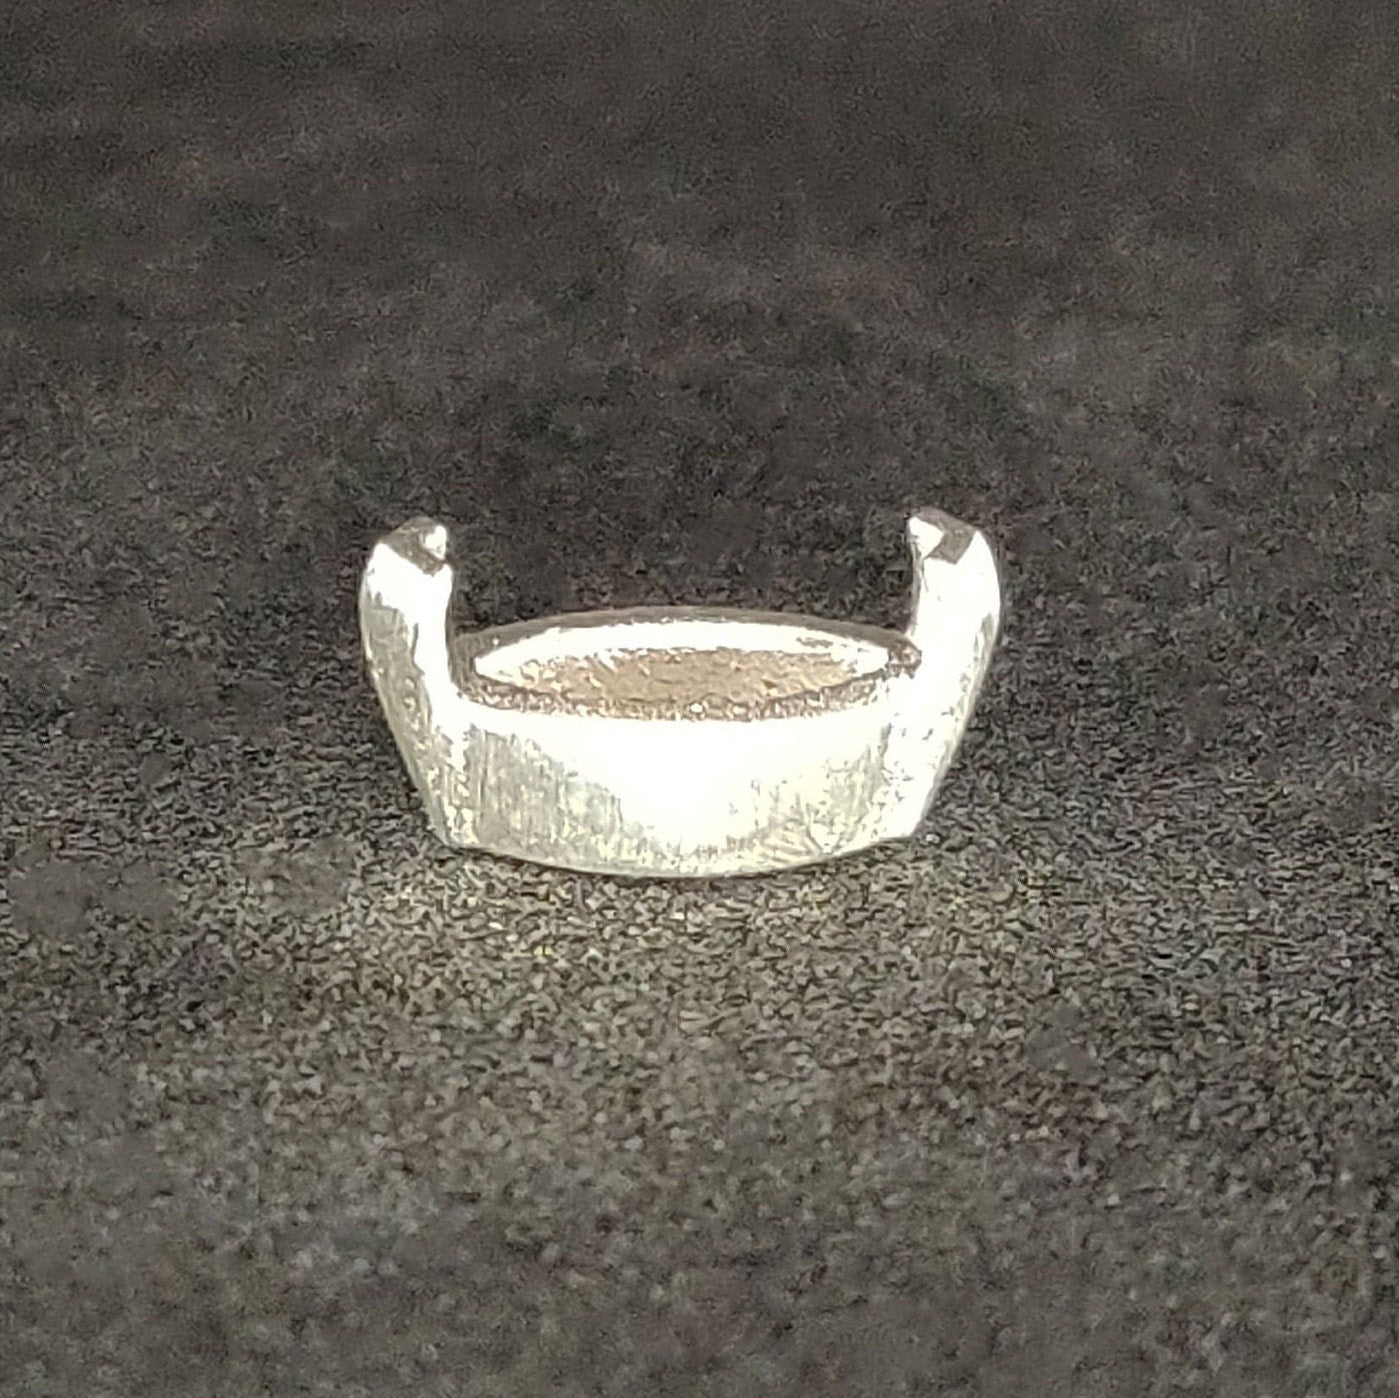 8x4mm Silver Marquise V Prong Claw Setting. Cast Recycled Silver Open-Sided Prong Setting. 9ct Yellow Gold Marquise Setting.